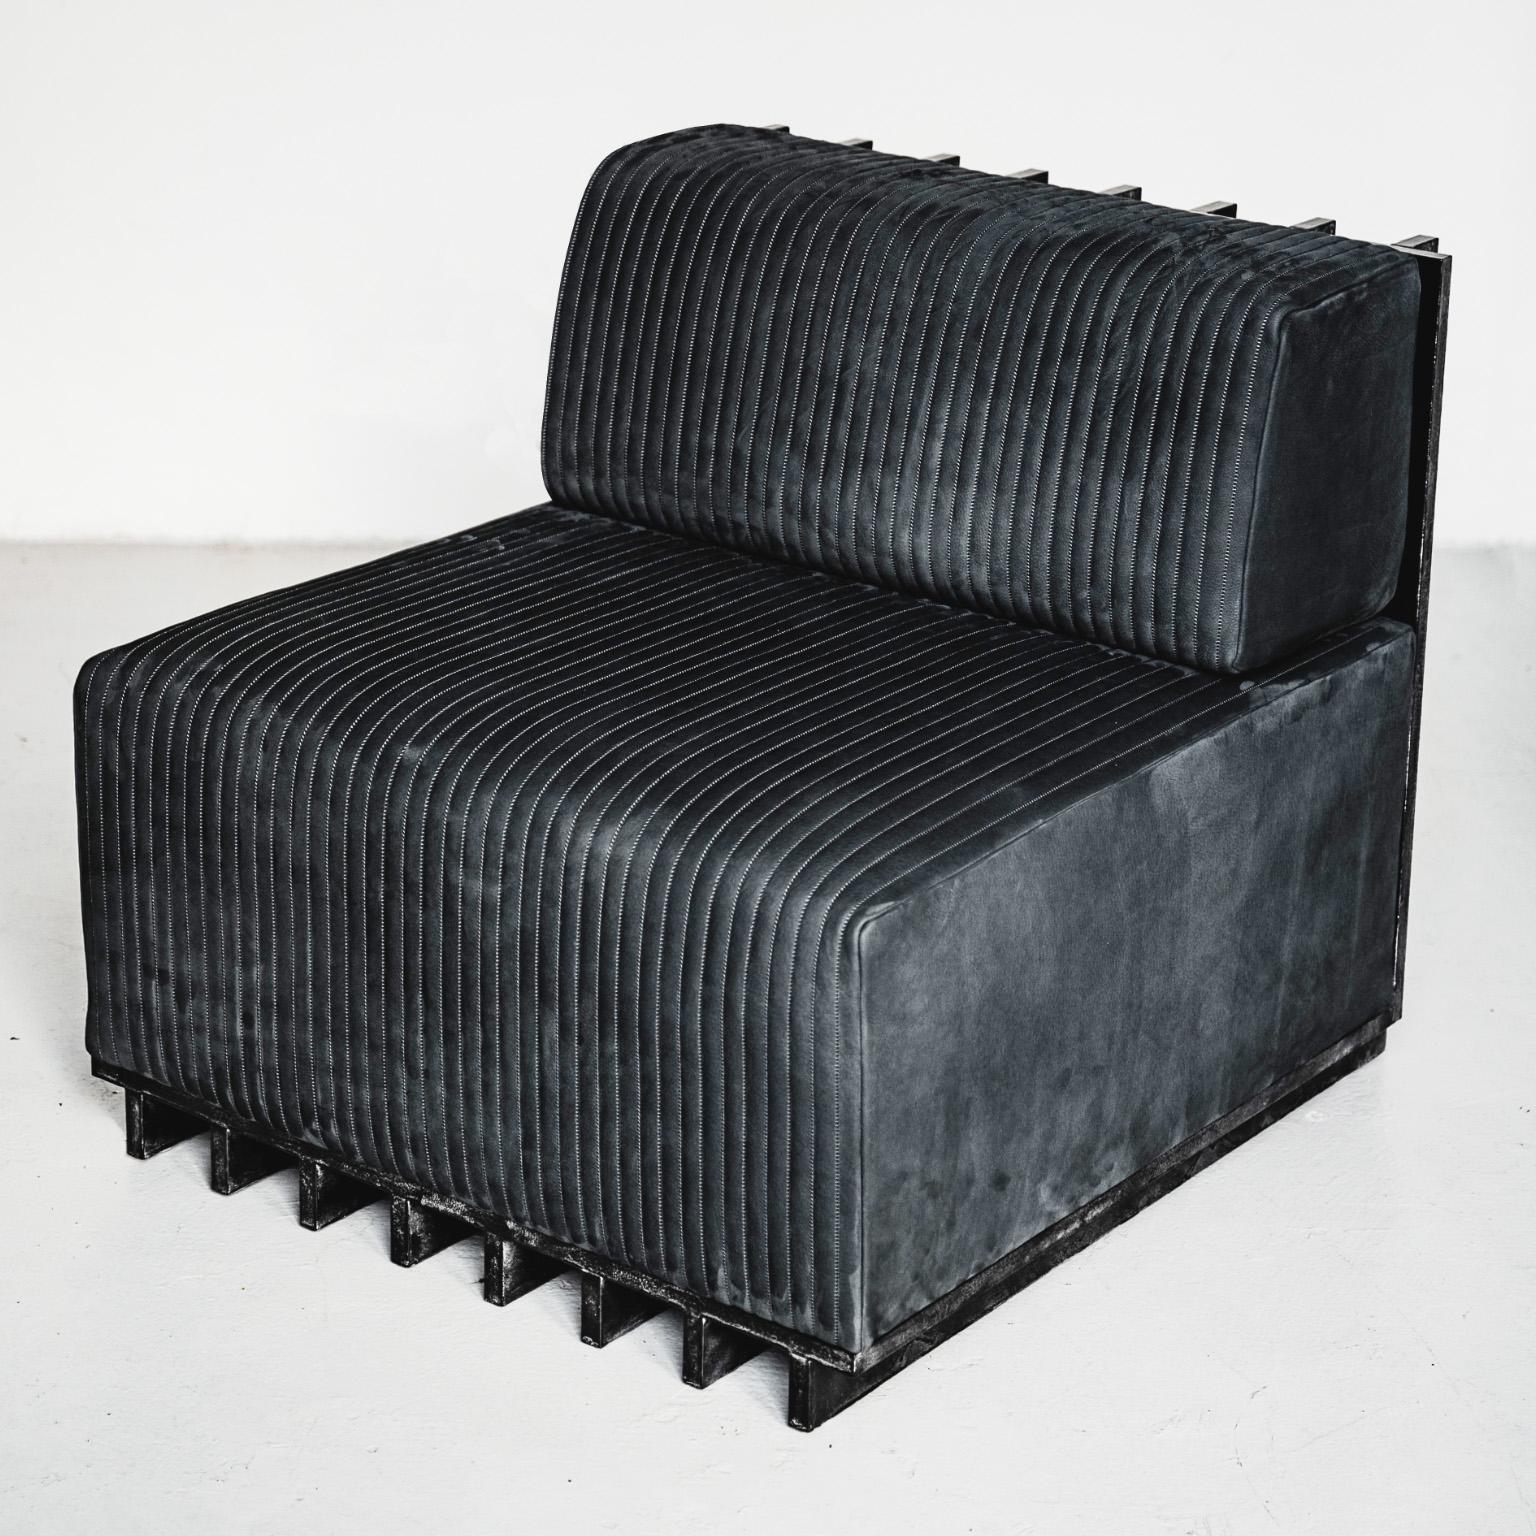 Contemporary Lamè modular seating system by Spinzi, handmade leather sofa chair In Good Condition For Sale In Milan, IT